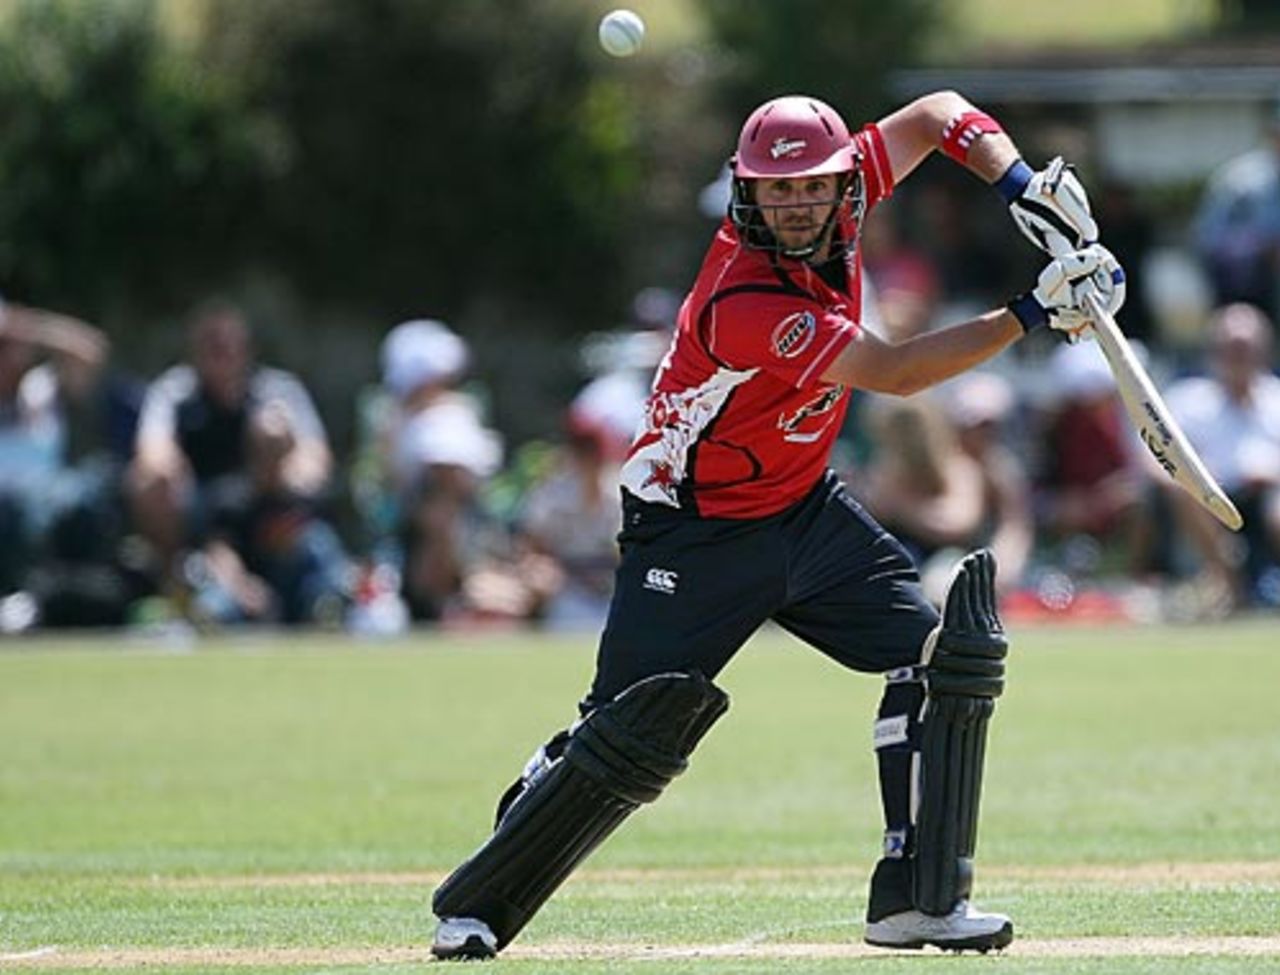 Michael Papps in action, Auckland v Canterbury, HRV Twenty20 Cup, Auckland, January 4, 2009